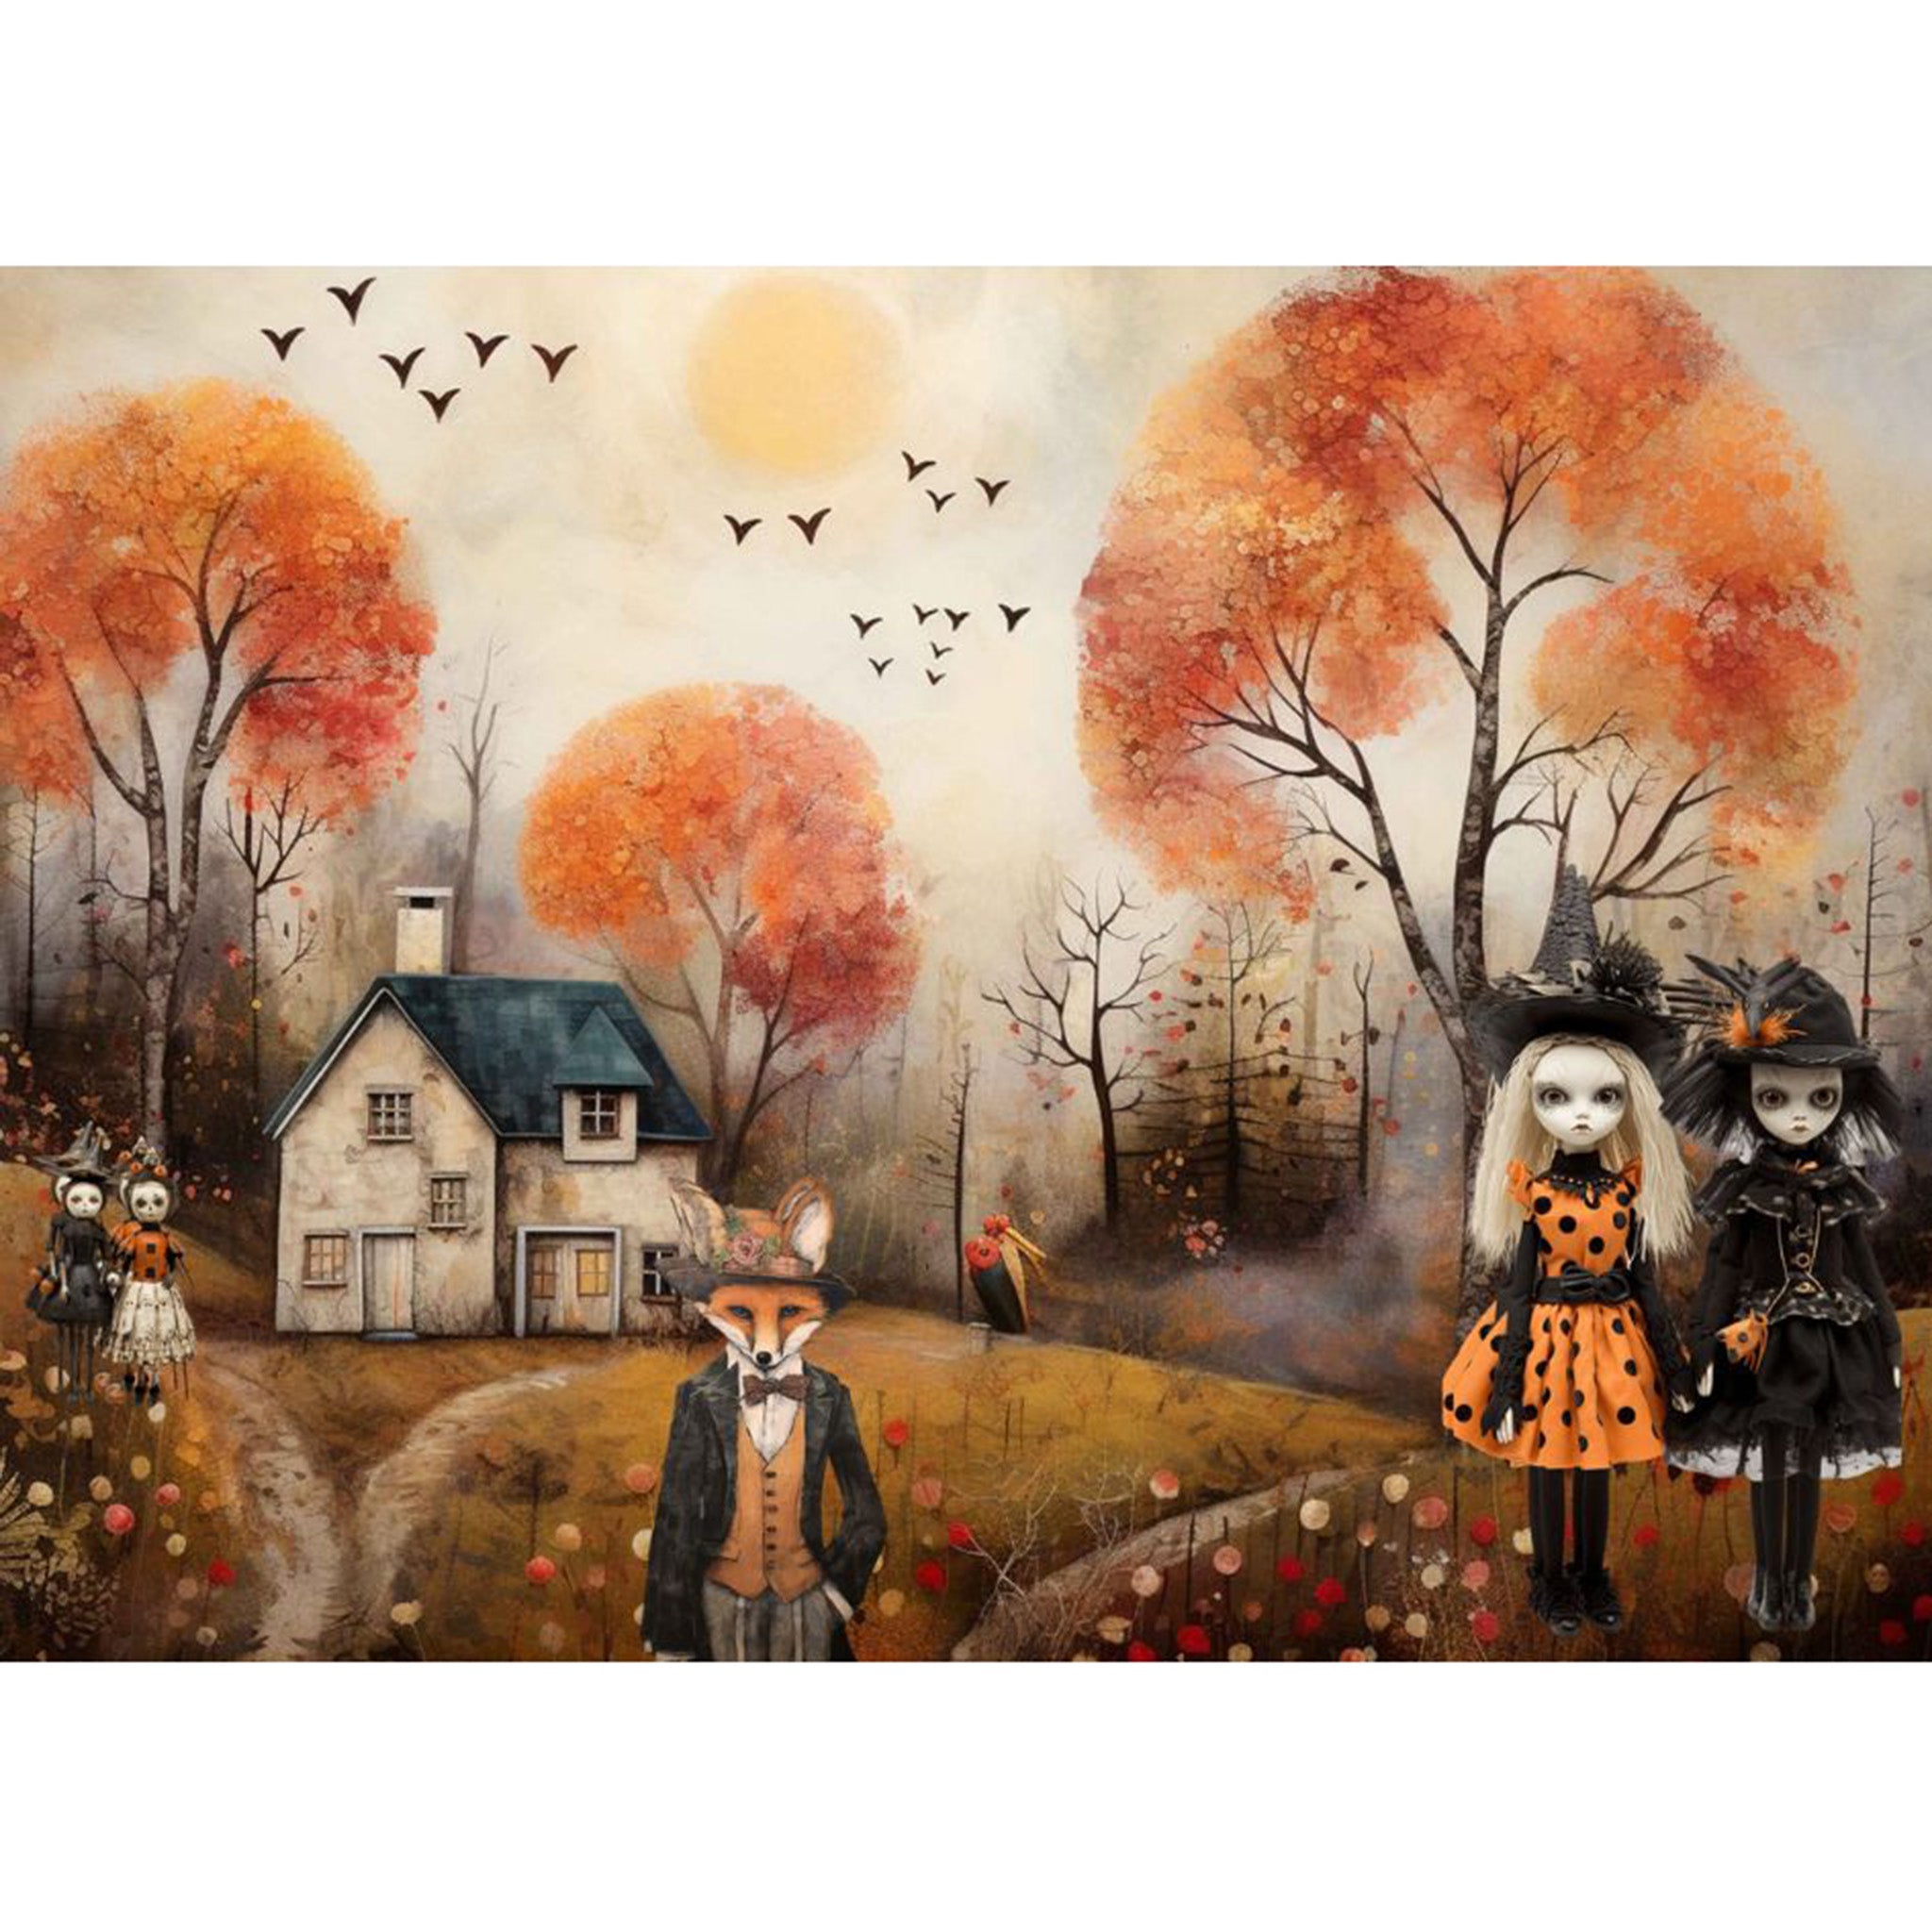 Tissue paper design featuring four eerie witches dolls, a cleverly dressed fox, a haunted house, and autumnal trees. White borders are on the top and bottom.